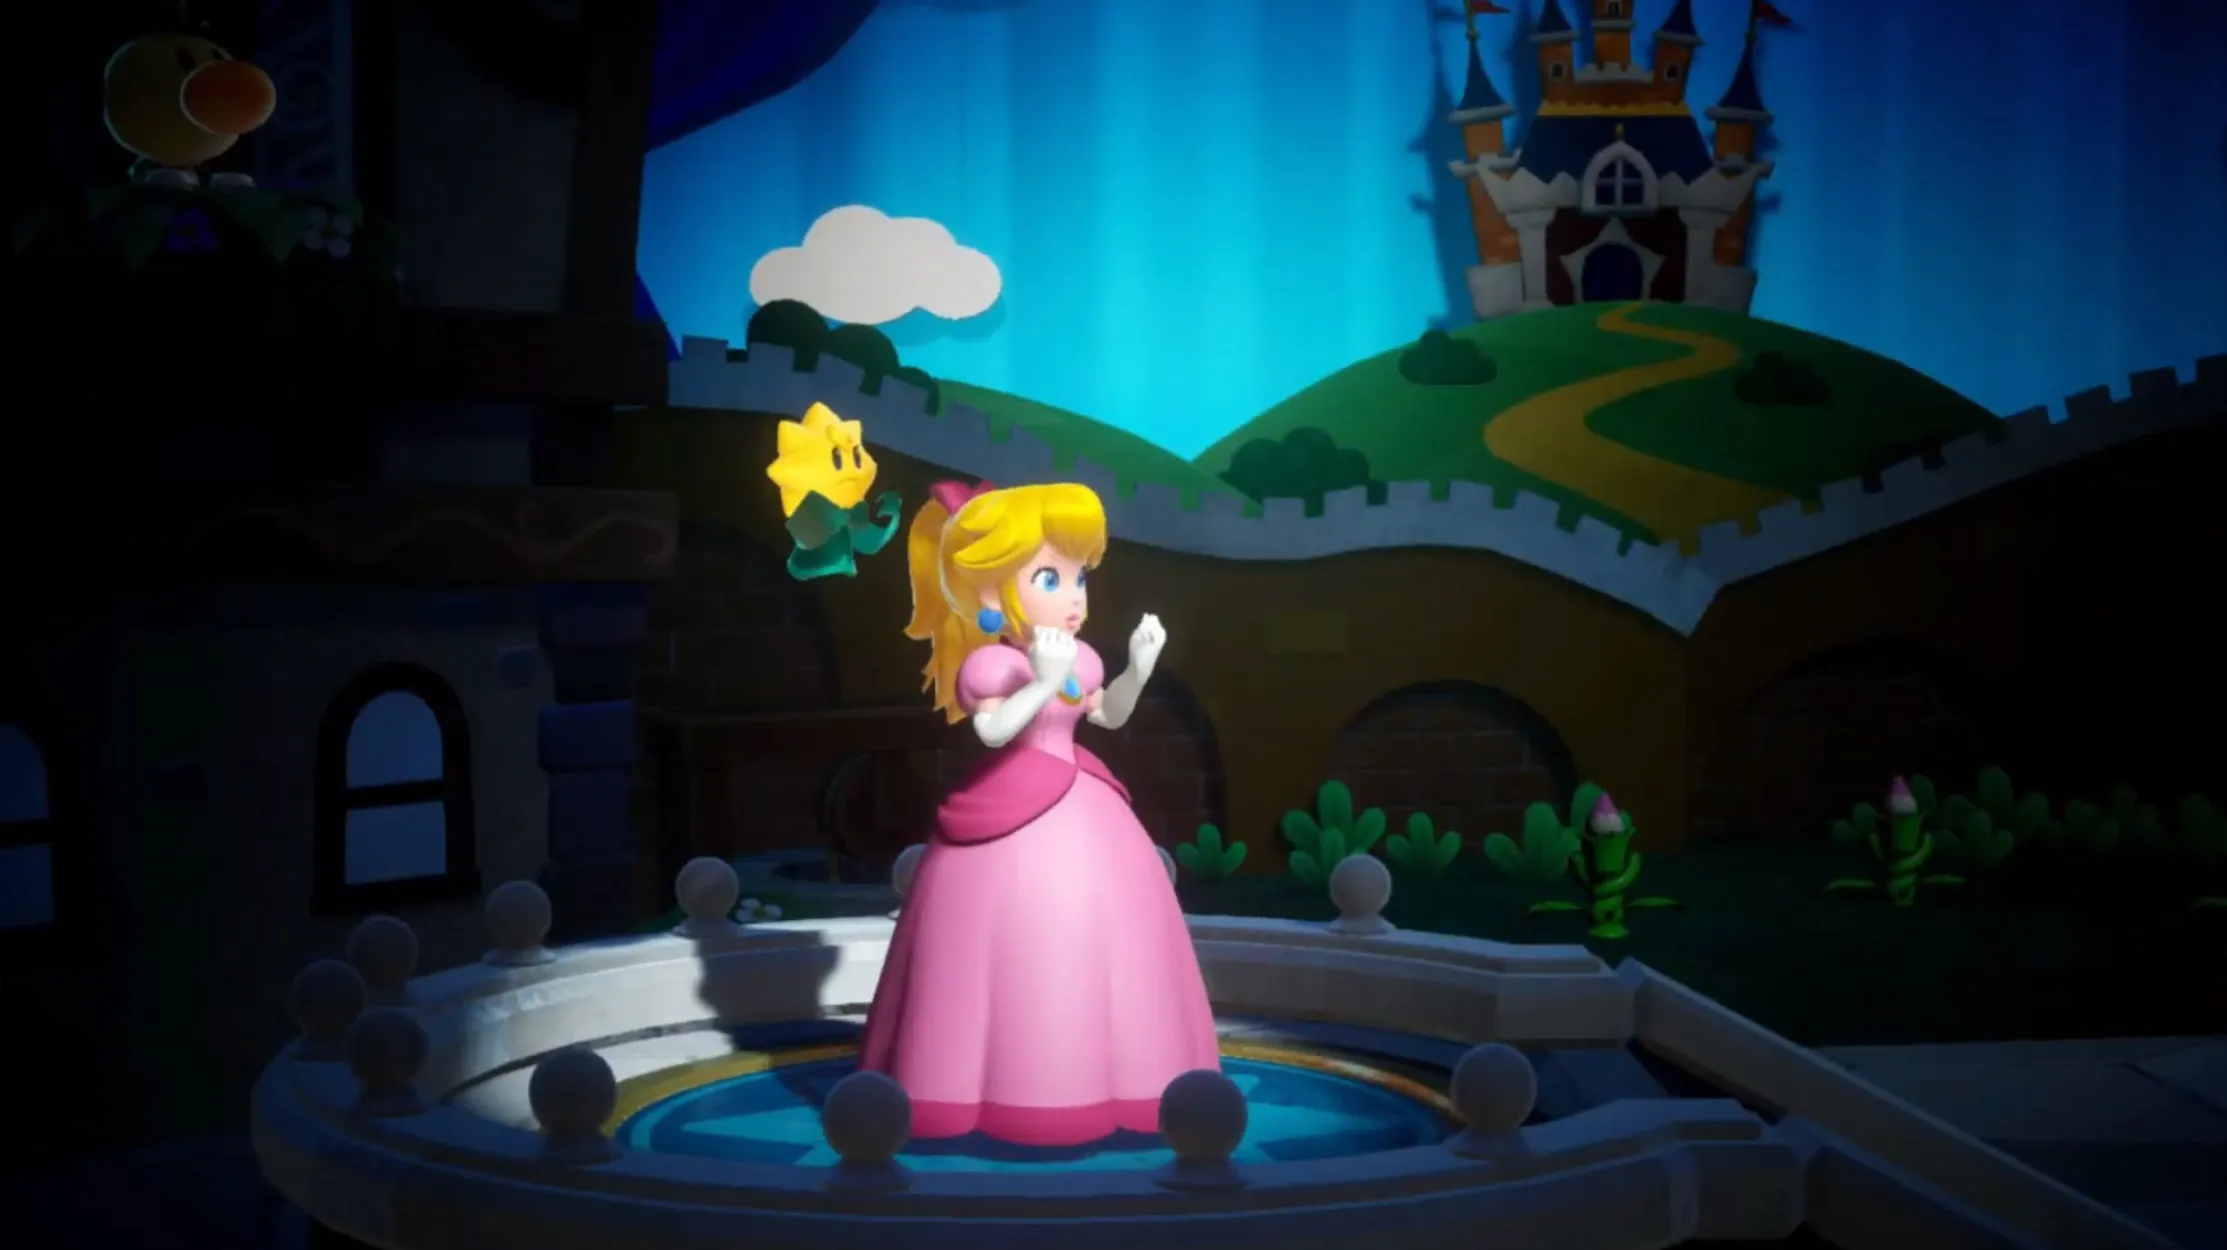 What Happened To Super Princess Peach 2? 